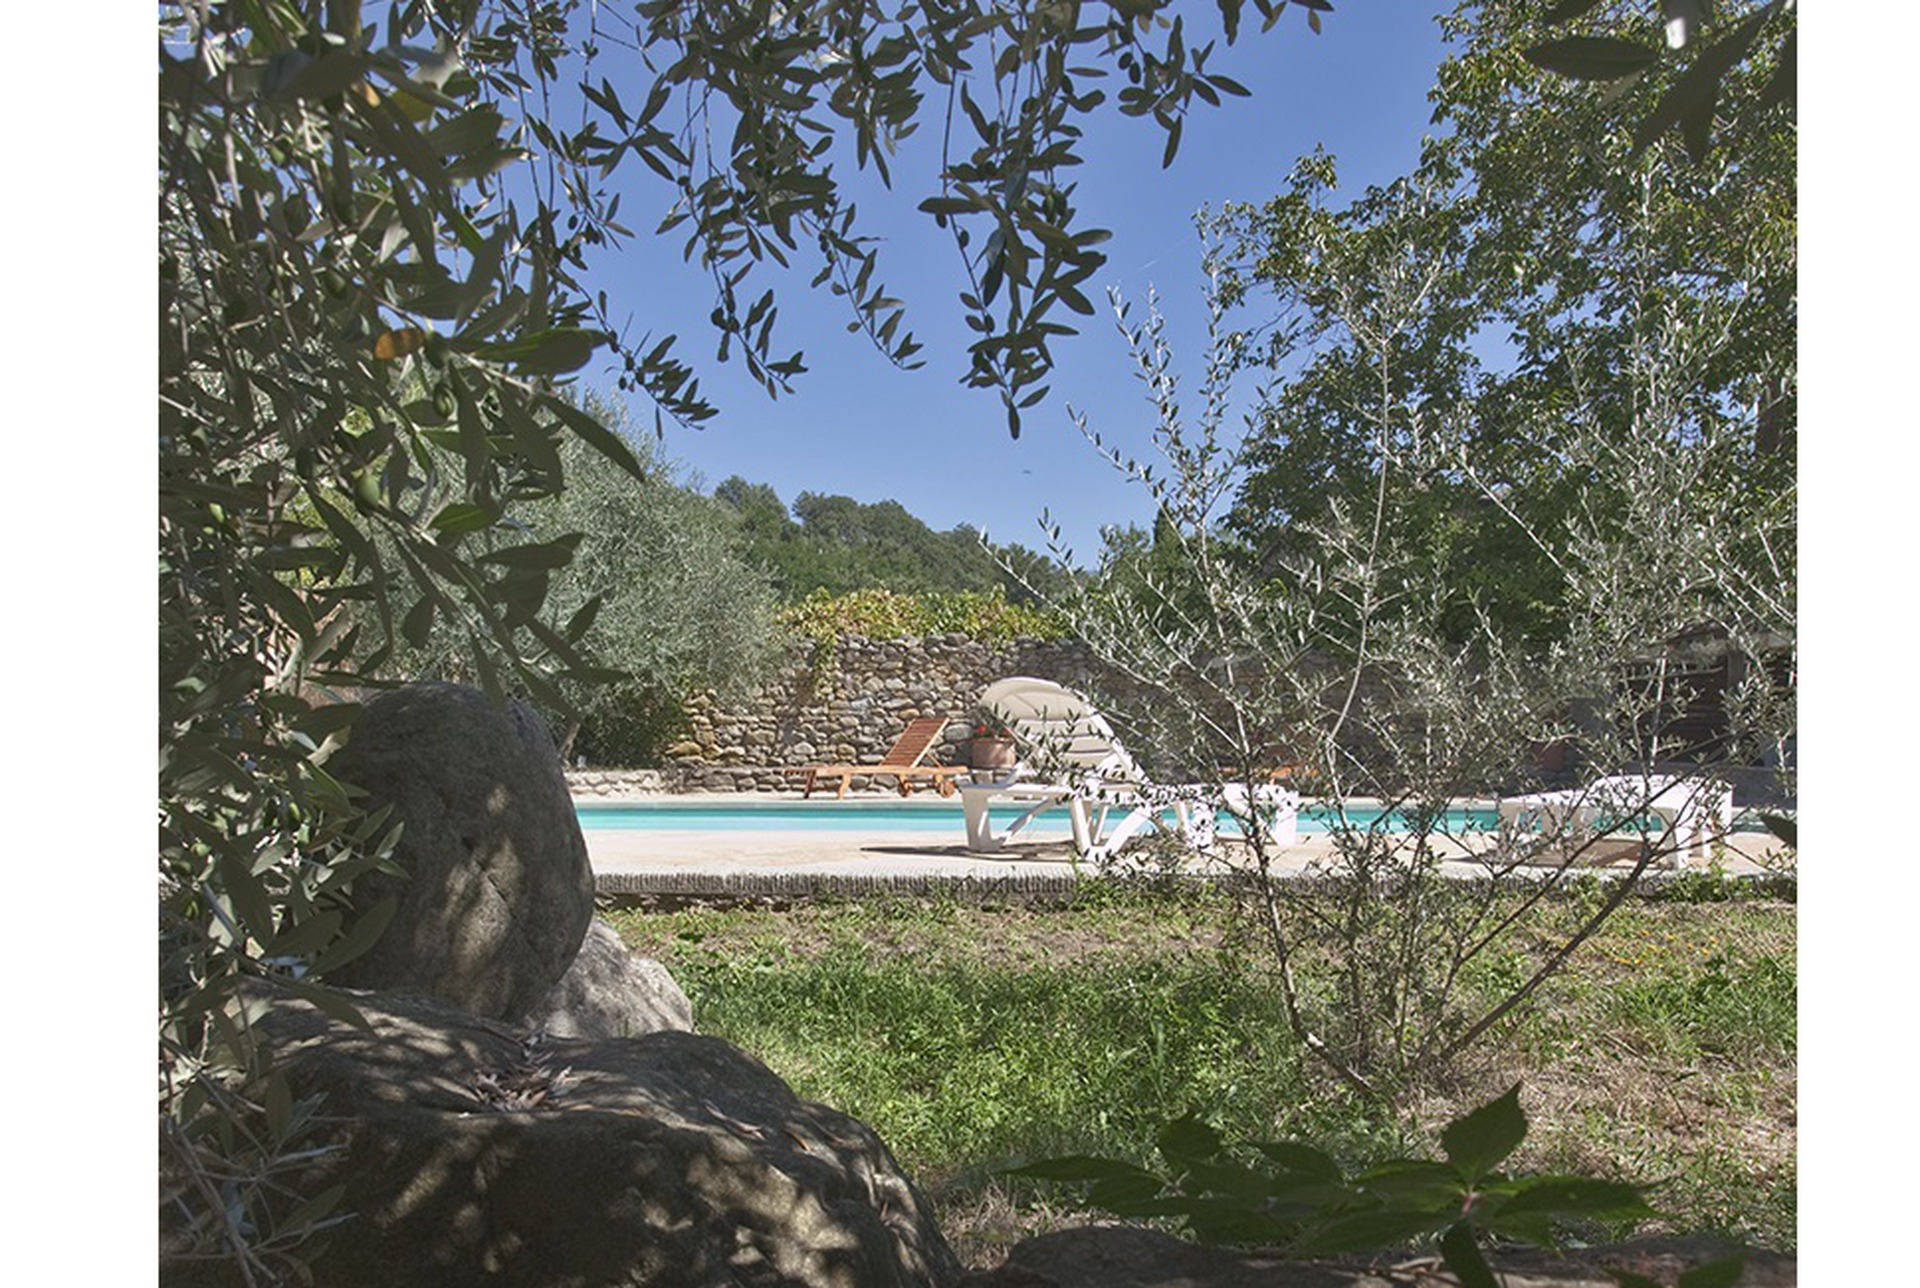 Swimming pool from Olive grove